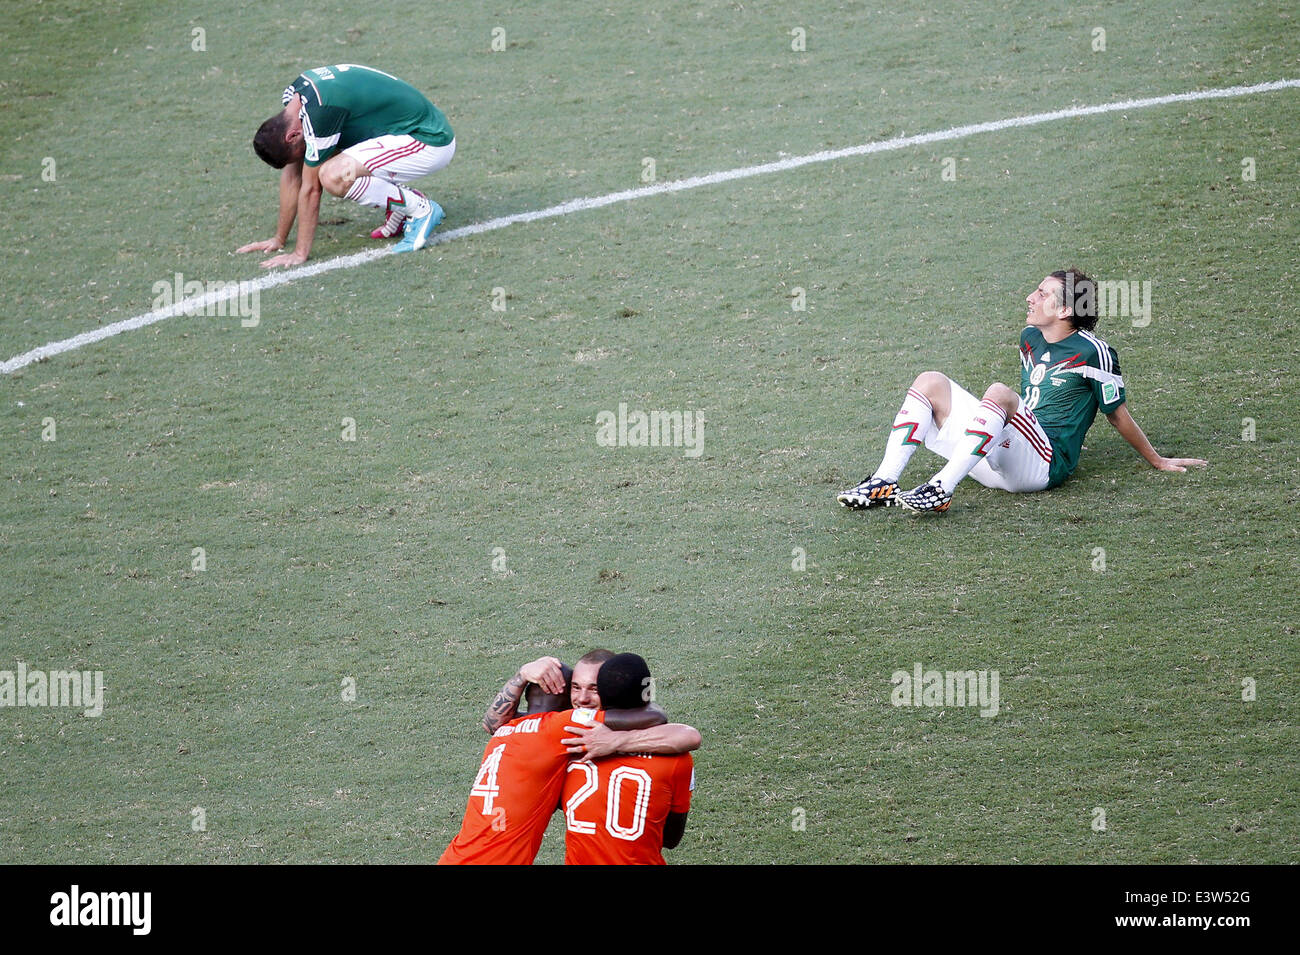 Fortaleza, Brazil. 29th June, 2014. Mexico's Andres Guardado (R) reacts while Netherlands' players celebrate their victory after a Round of 16 match between Netherlands and Mexico of 2014 FIFA World Cup at the Estadio Castelao Stadium in Fortaleza, Brazil, on June 29, 2014. Netherlands won 2-1 over Mexico and qualified for Quarter-finals on Sunday. Credit:  Liao Yujie/Xinhua/Alamy Live News Stock Photo